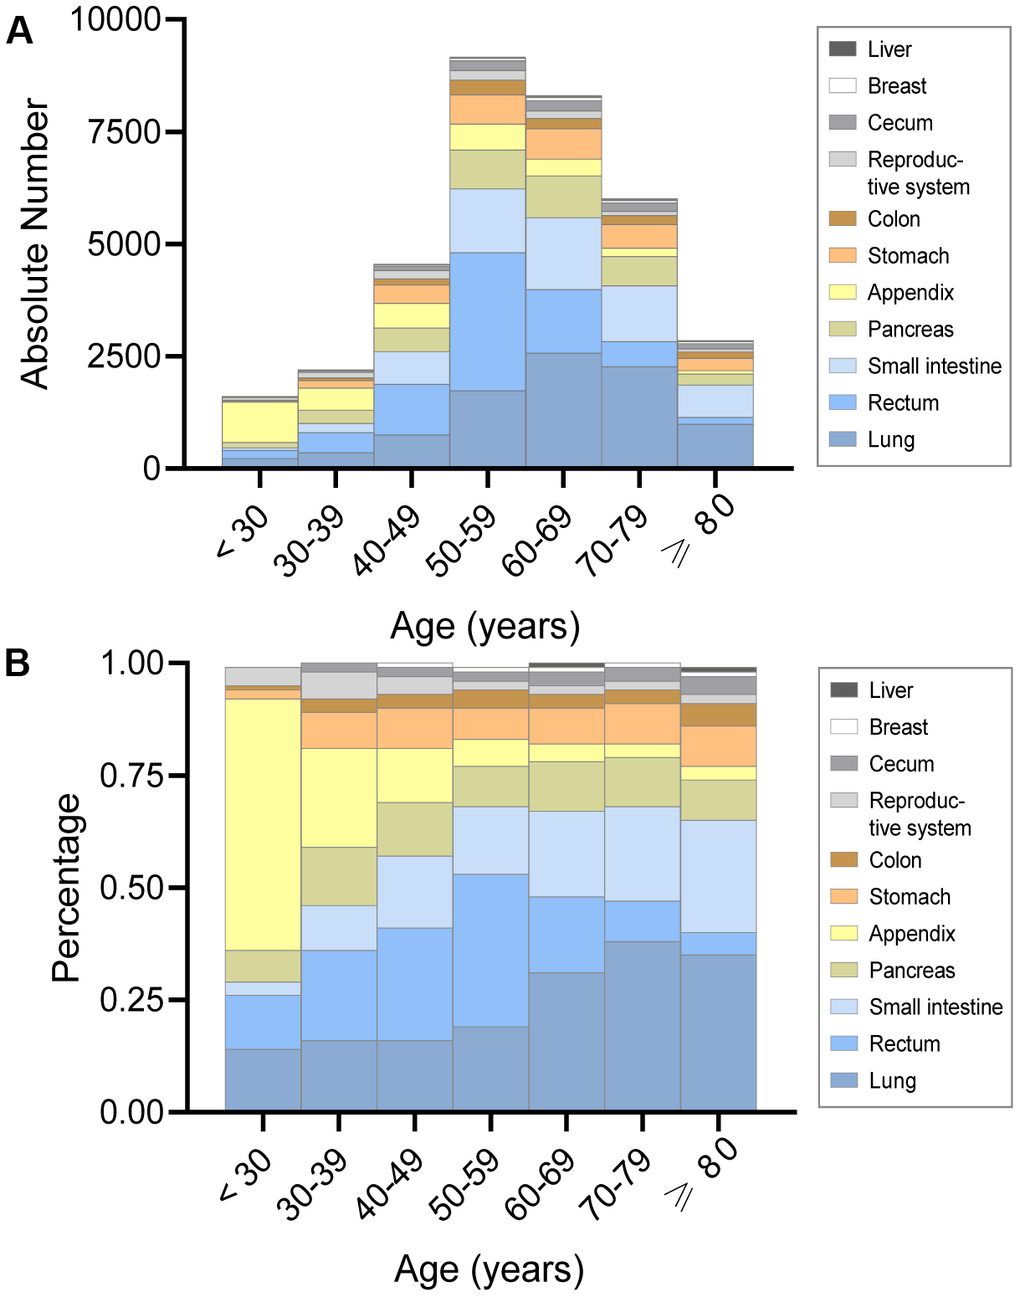 The absolute number and proportion of incidence in female neuroendocrine neoplasms (fNENs) by site for each age group. (A) The number of fNENs patients with various sites in each age group. (B) The proportion of fNENs patients with various sites in each age group.